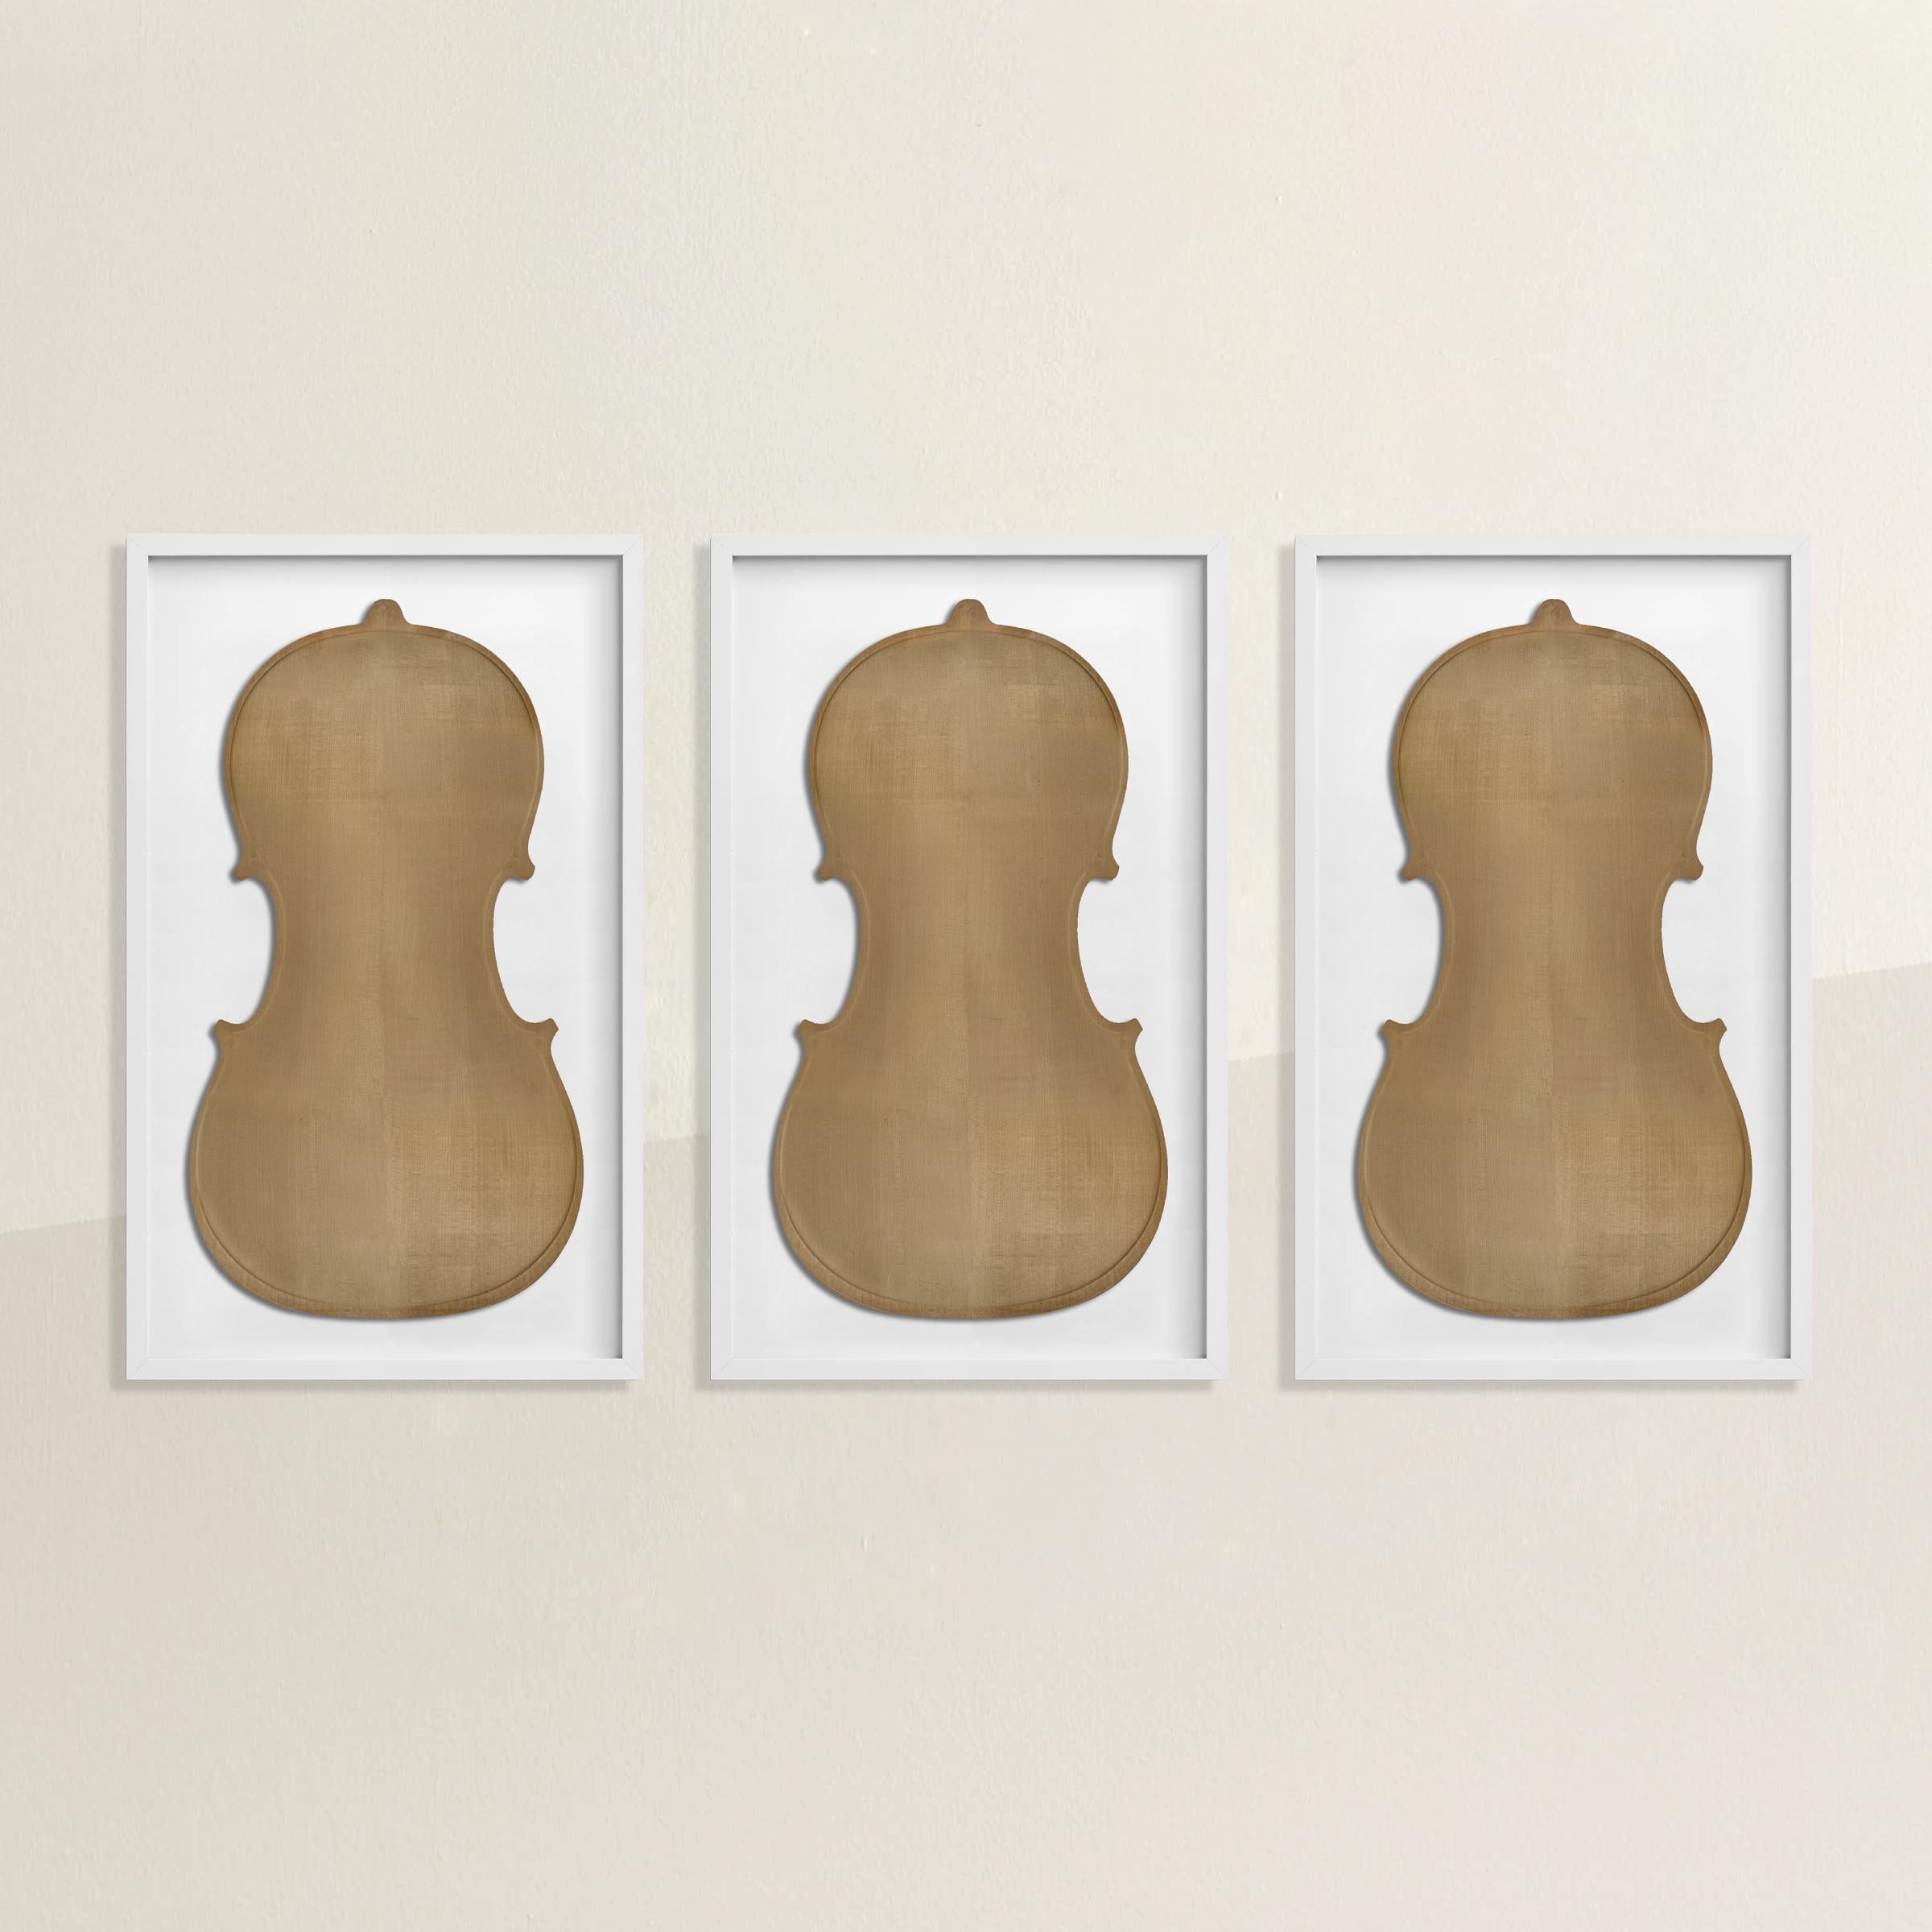 A remarkable set of three early 20th century Italian cello backs, each frames in a deep shadow box with a simple white gallery frame. Perfect for the classical music aficionado in your life!